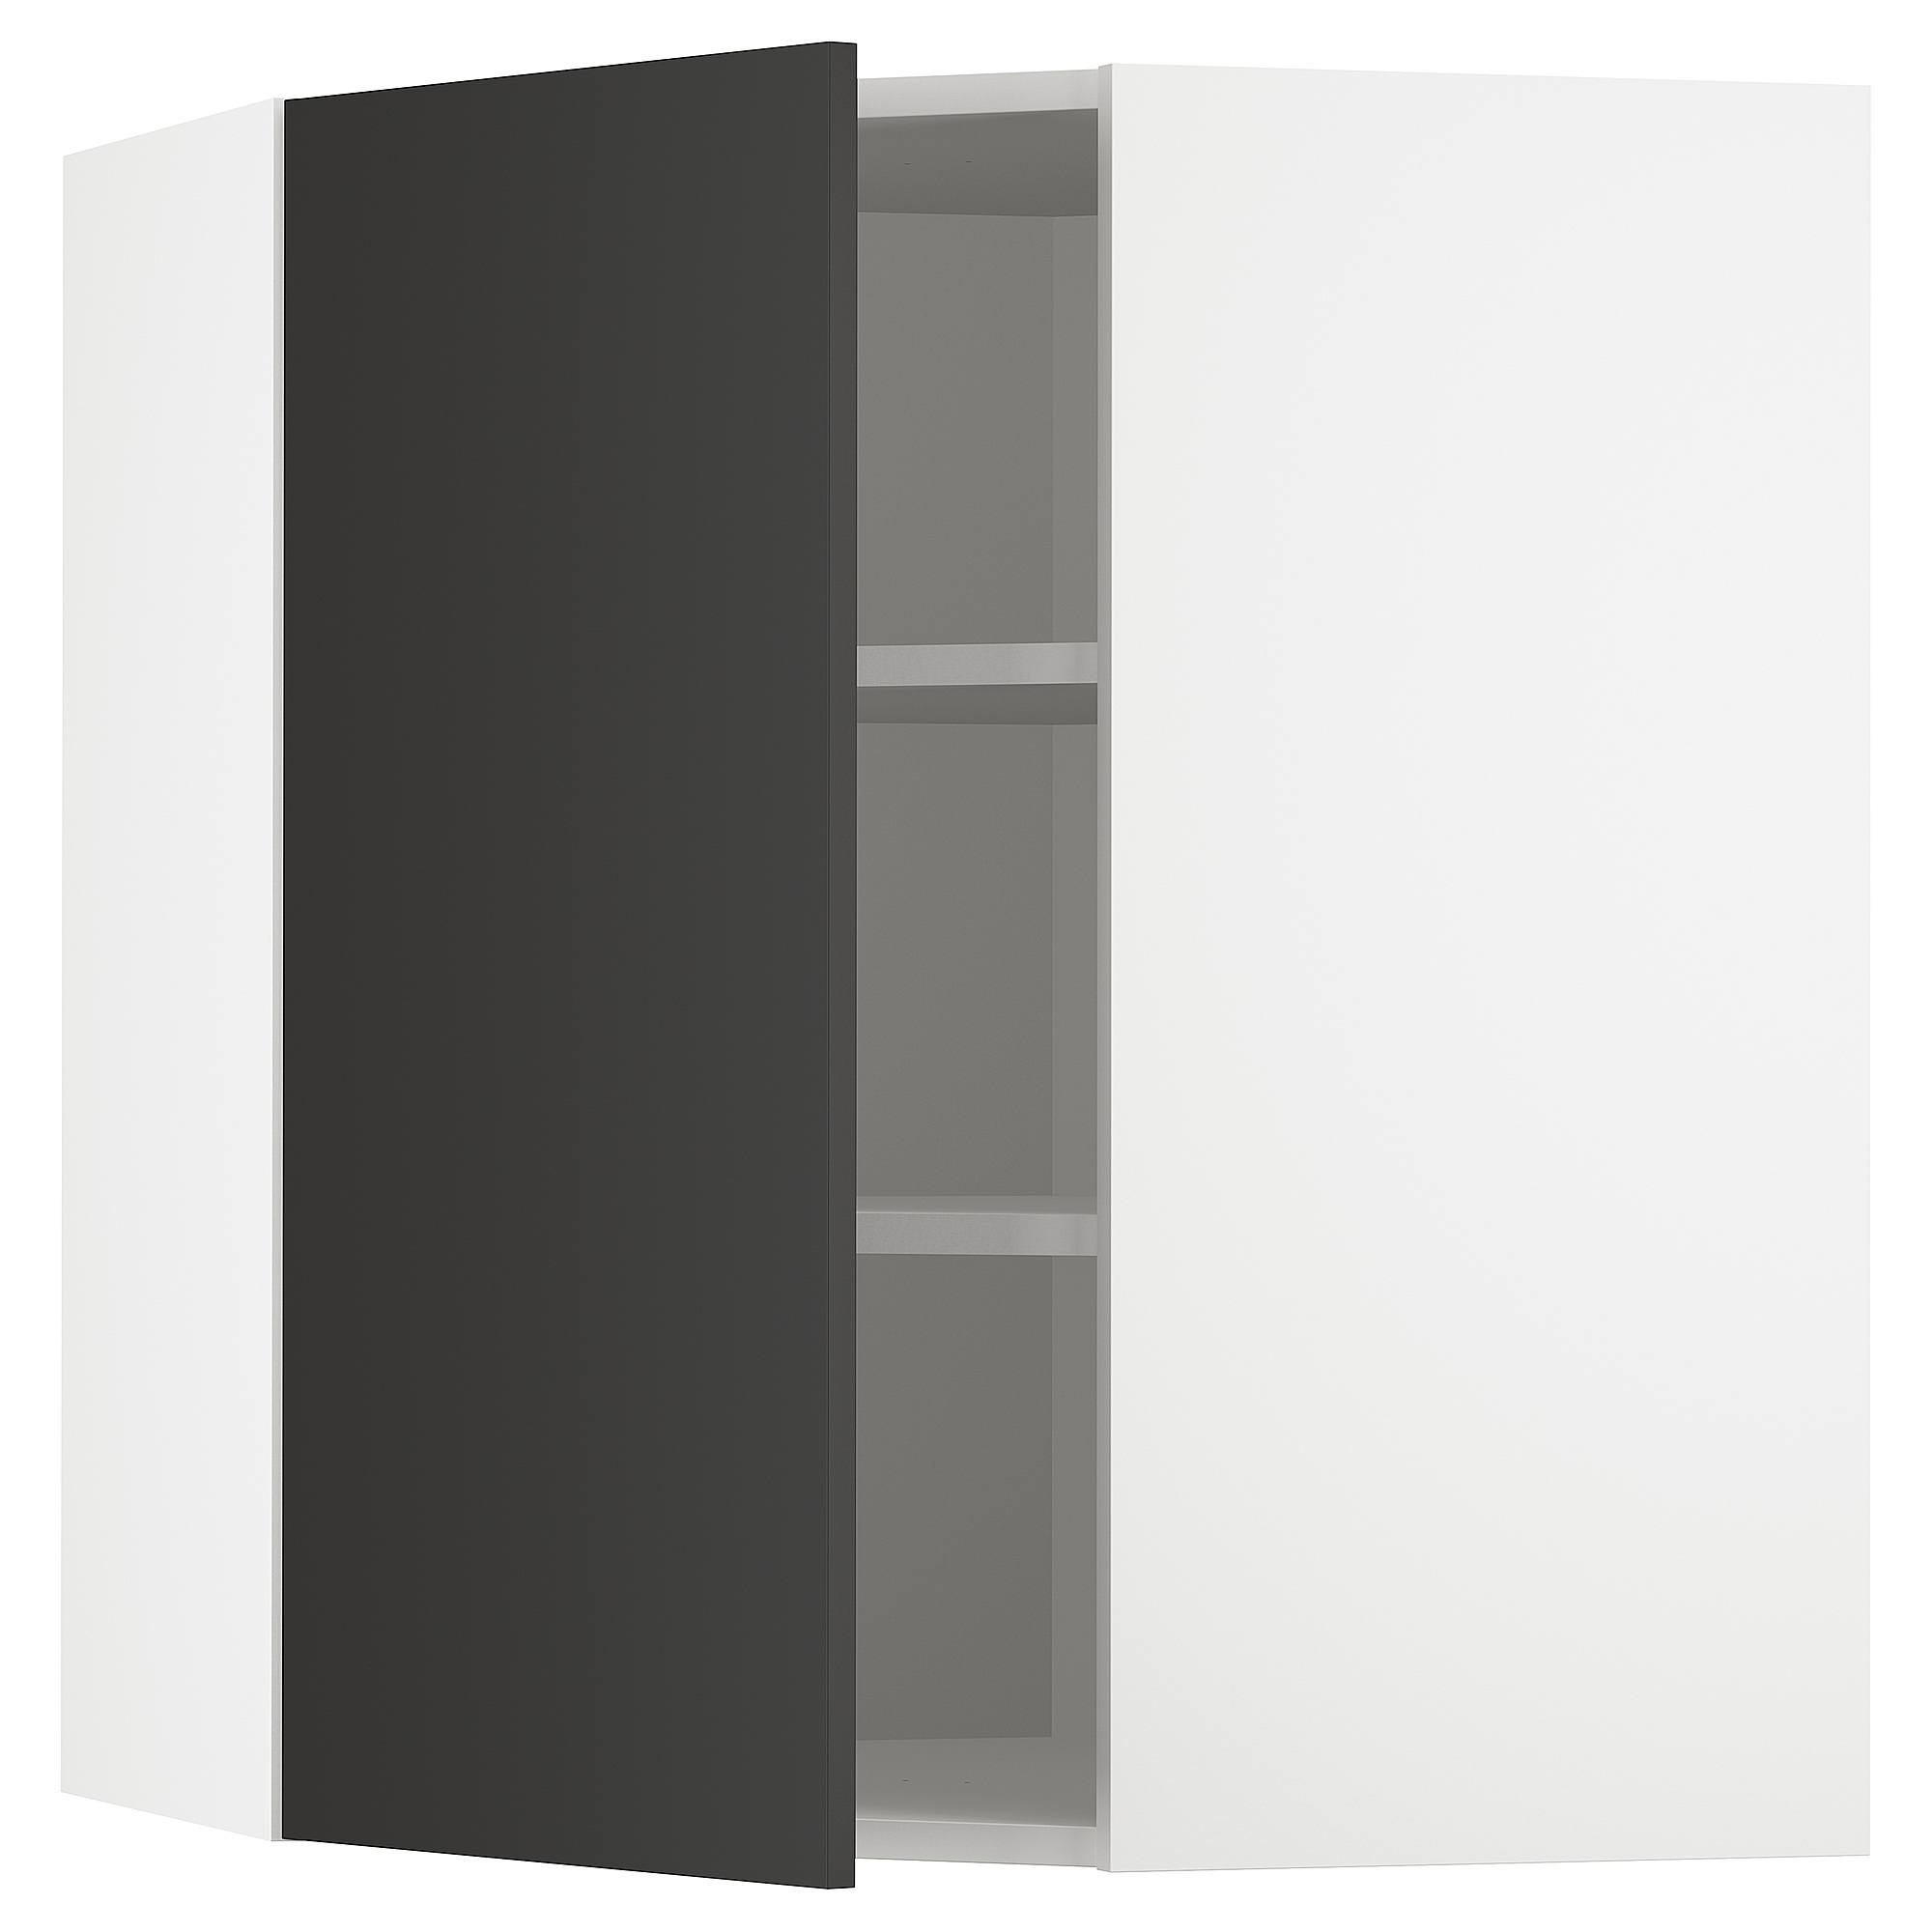 METOD corner wall cabinet with shelves